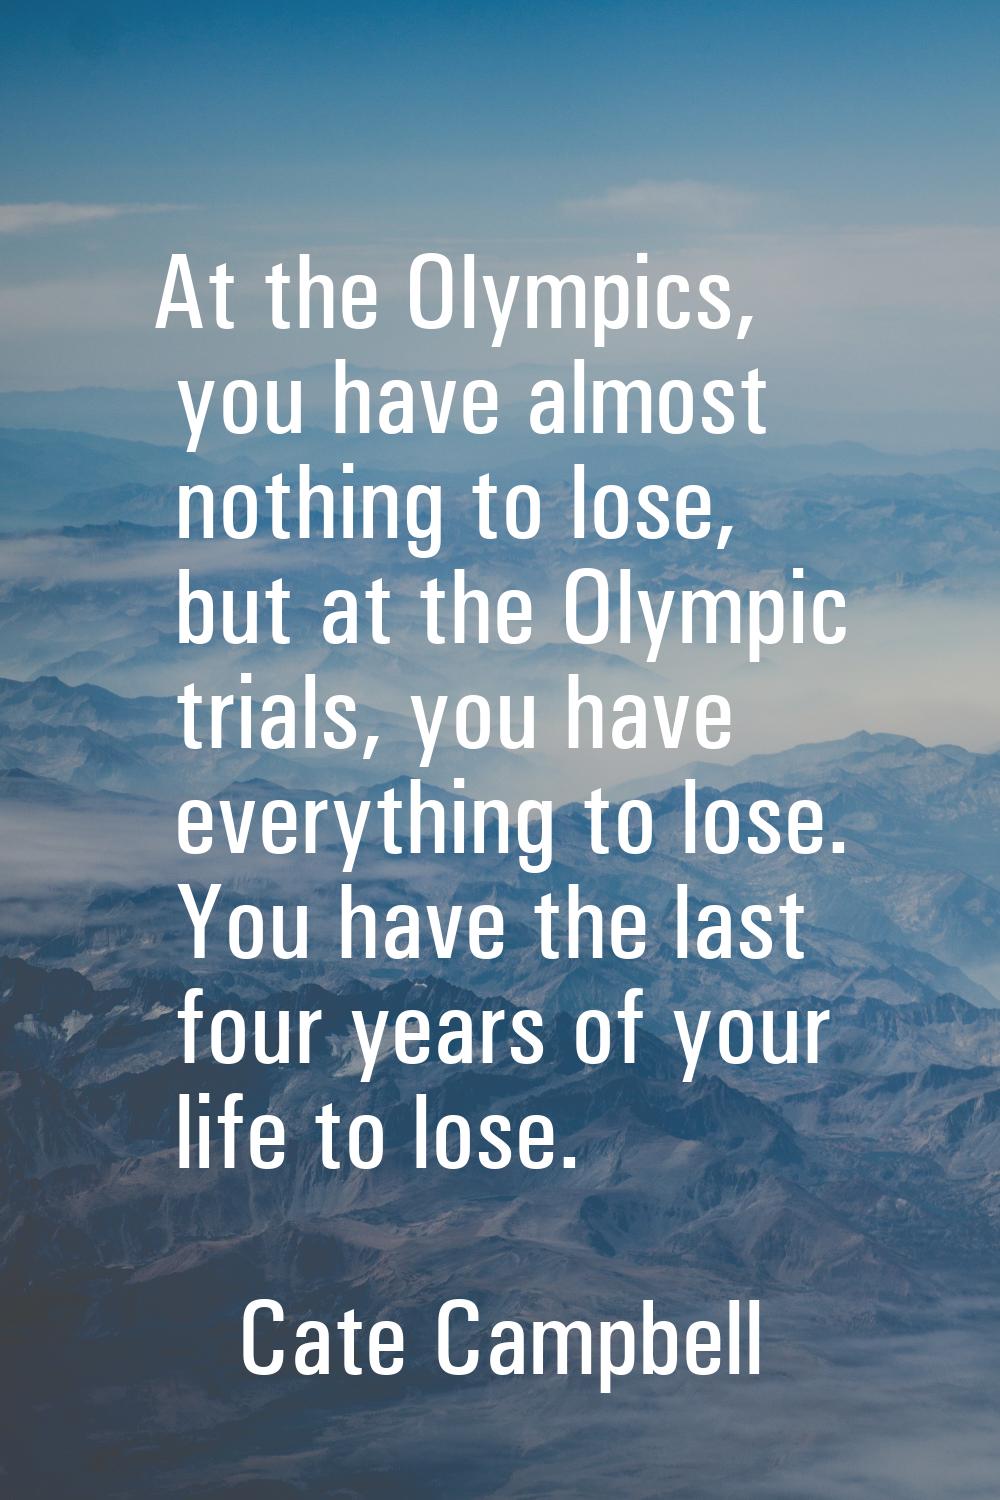 At the Olympics, you have almost nothing to lose, but at the Olympic trials, you have everything to